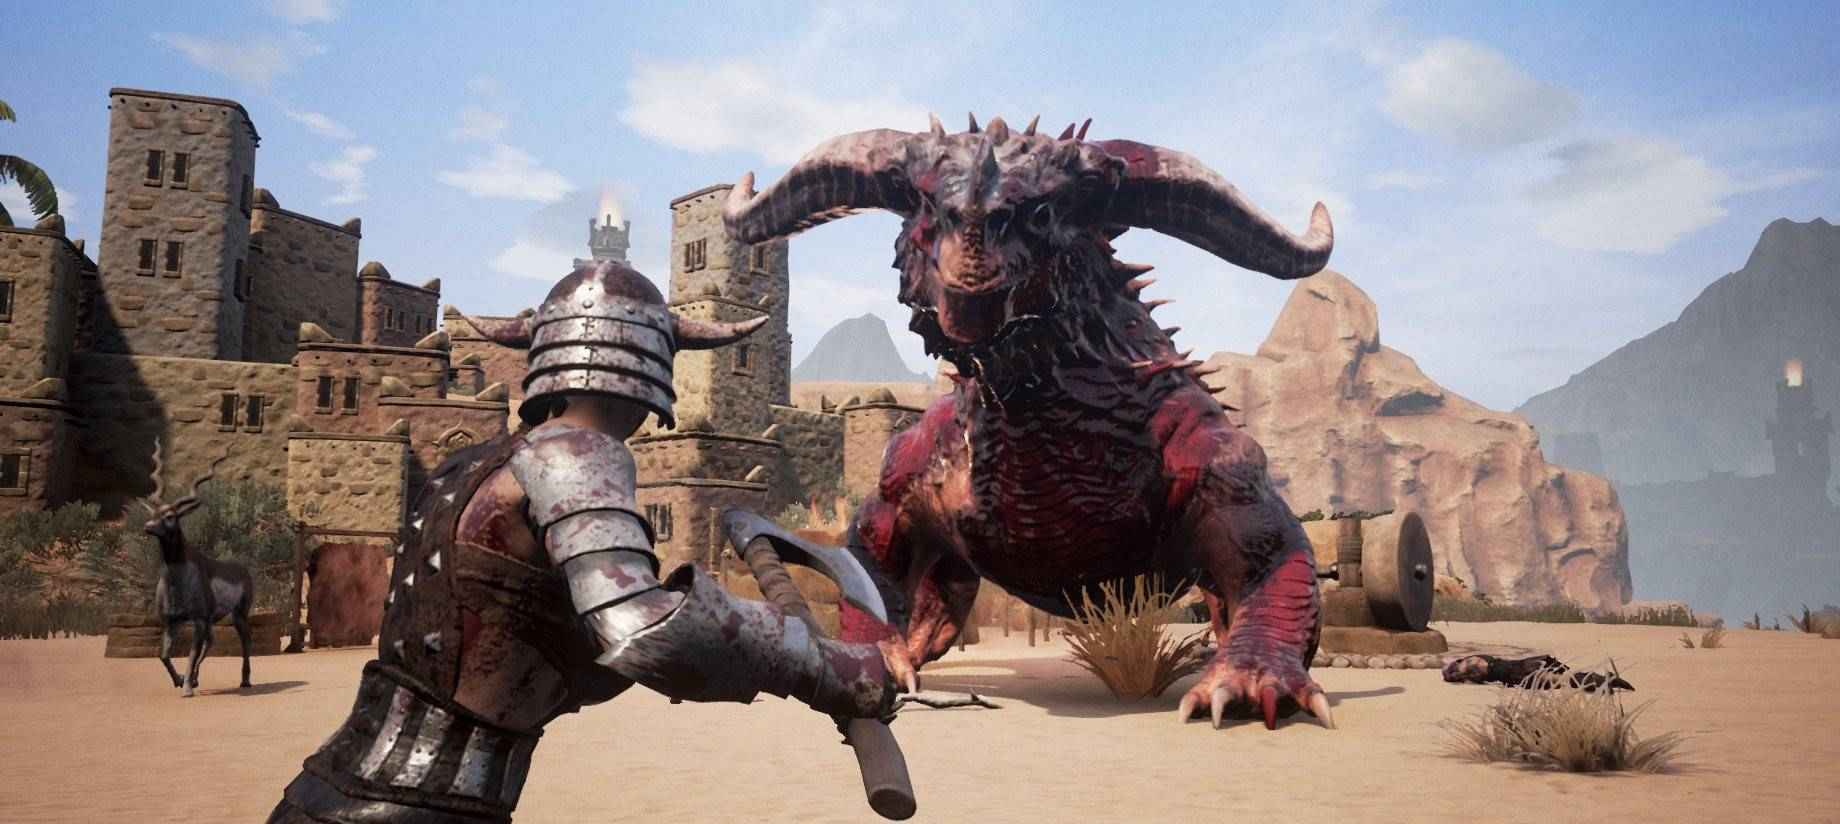 conan-exiles-rhino-locations-uncovered-playstation-universe